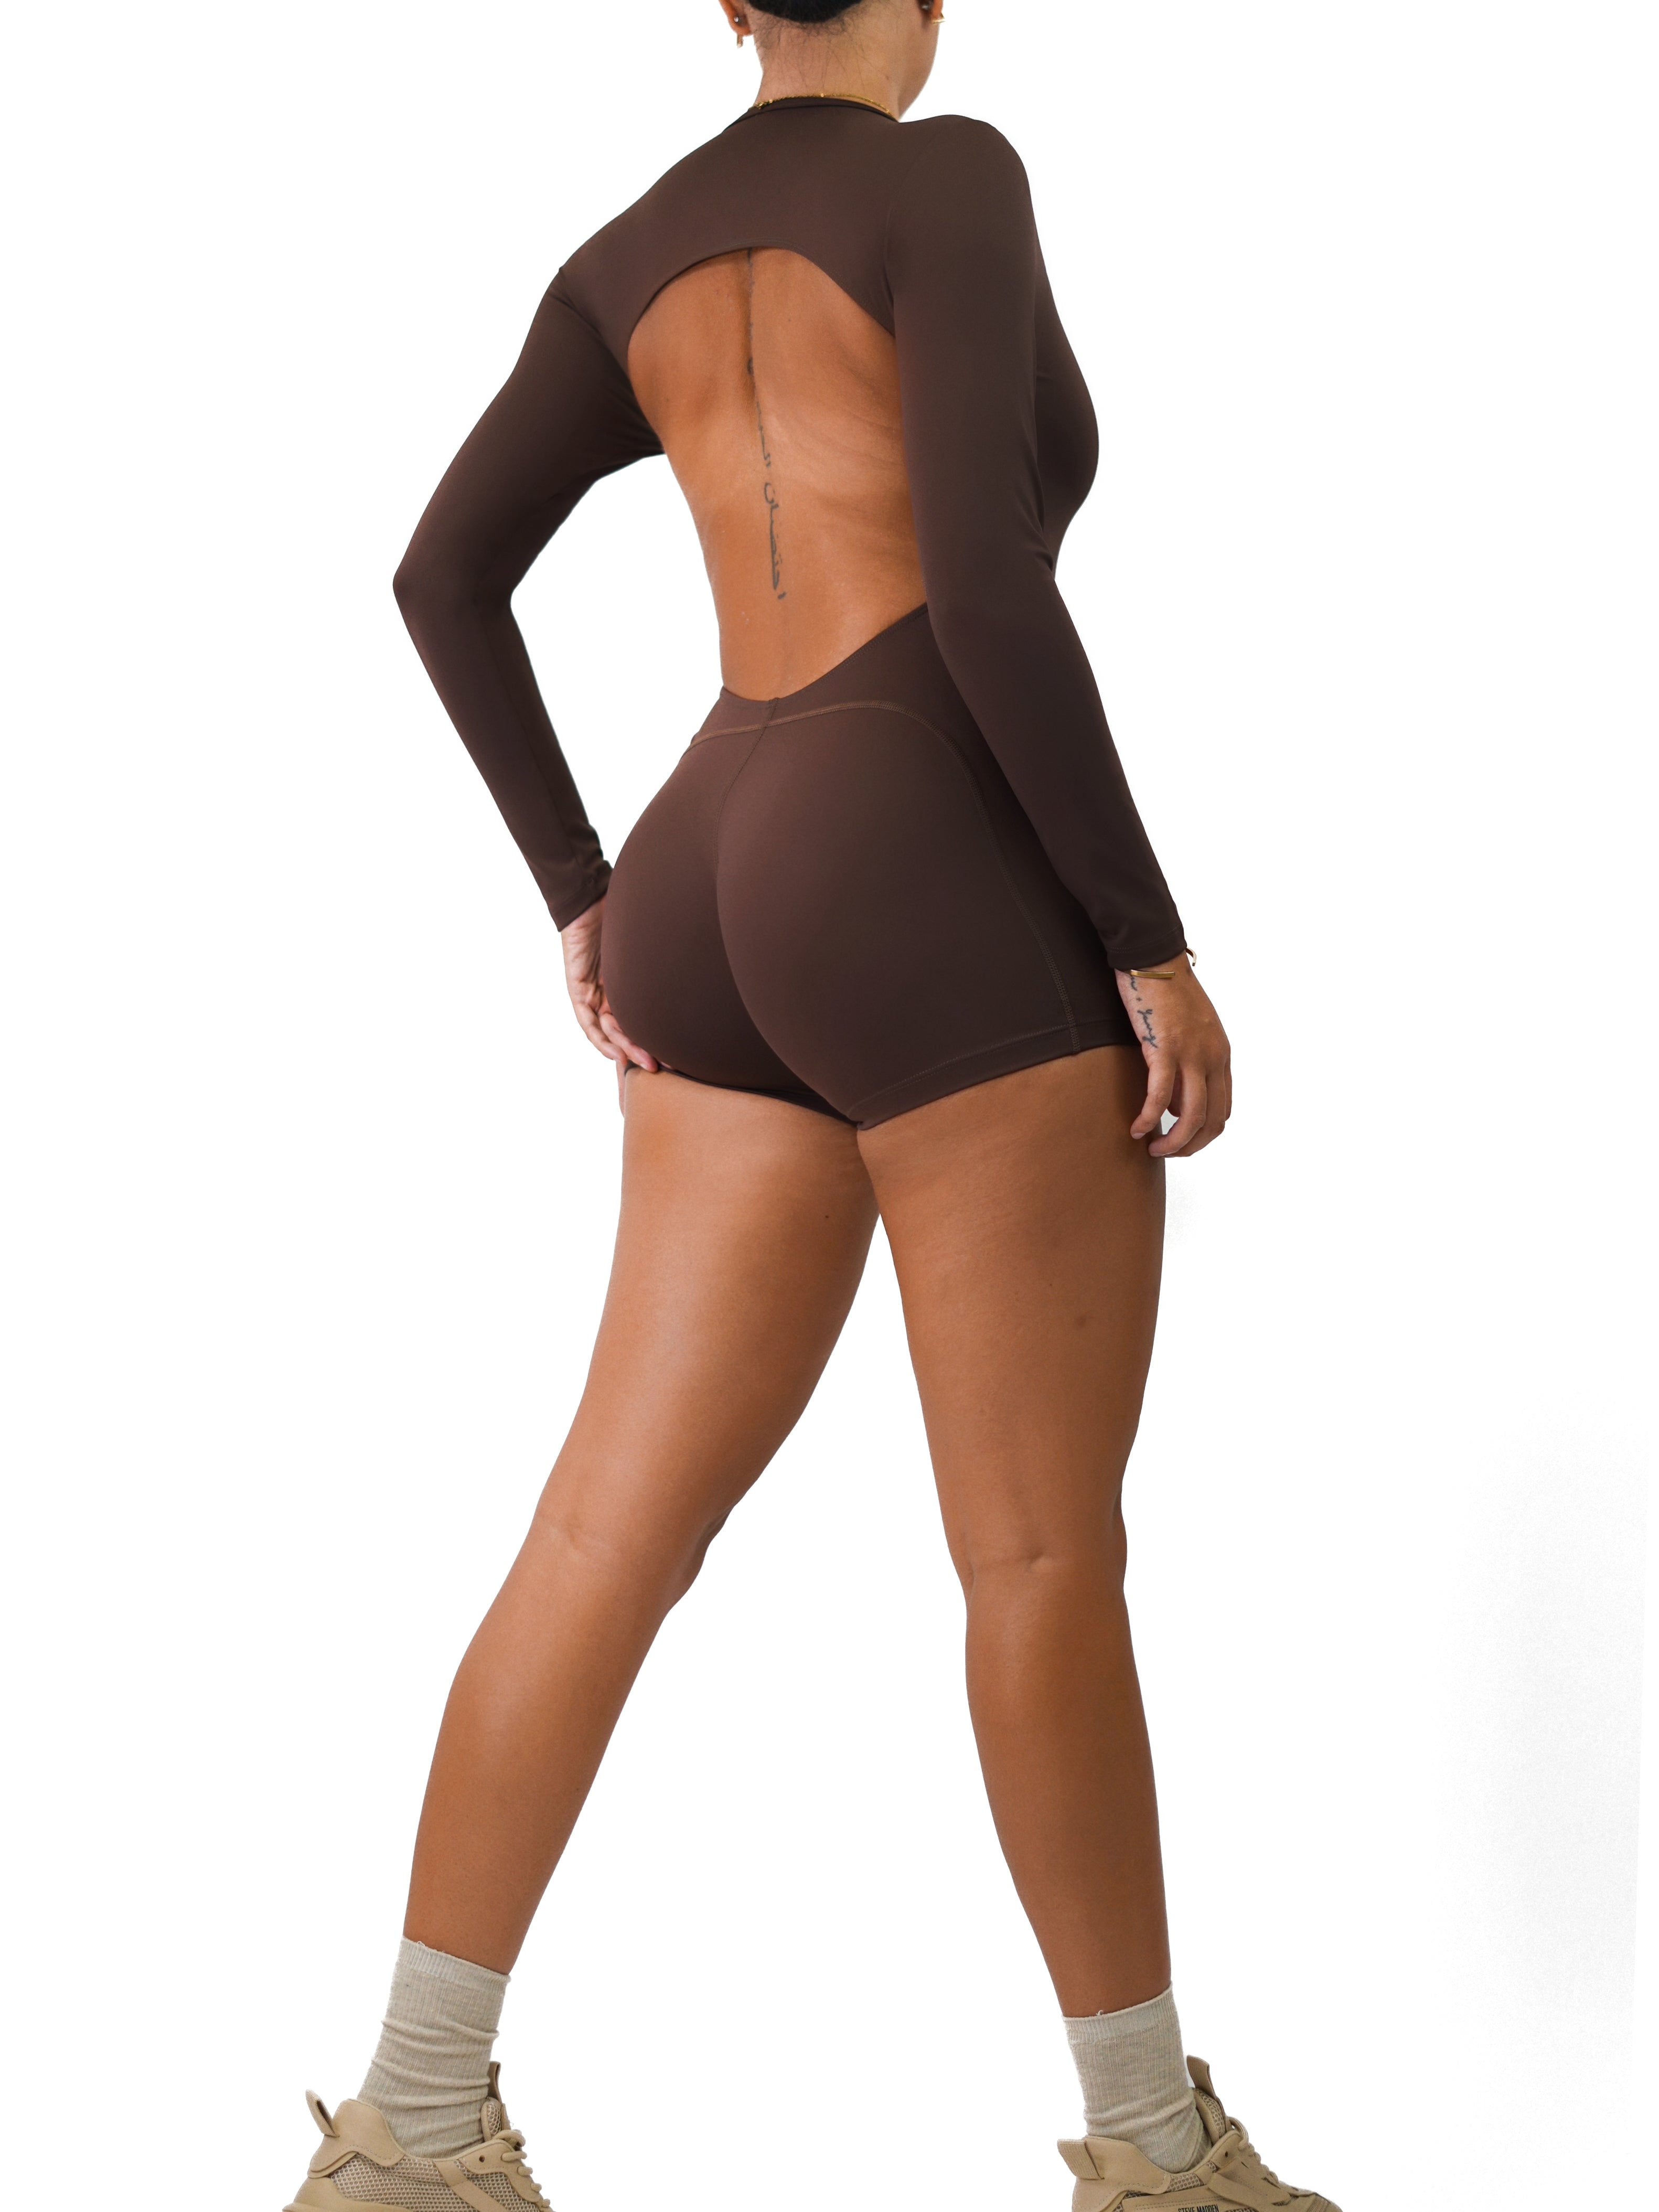 Backless Long Sleeve Short Romper (Cocoa Brown)